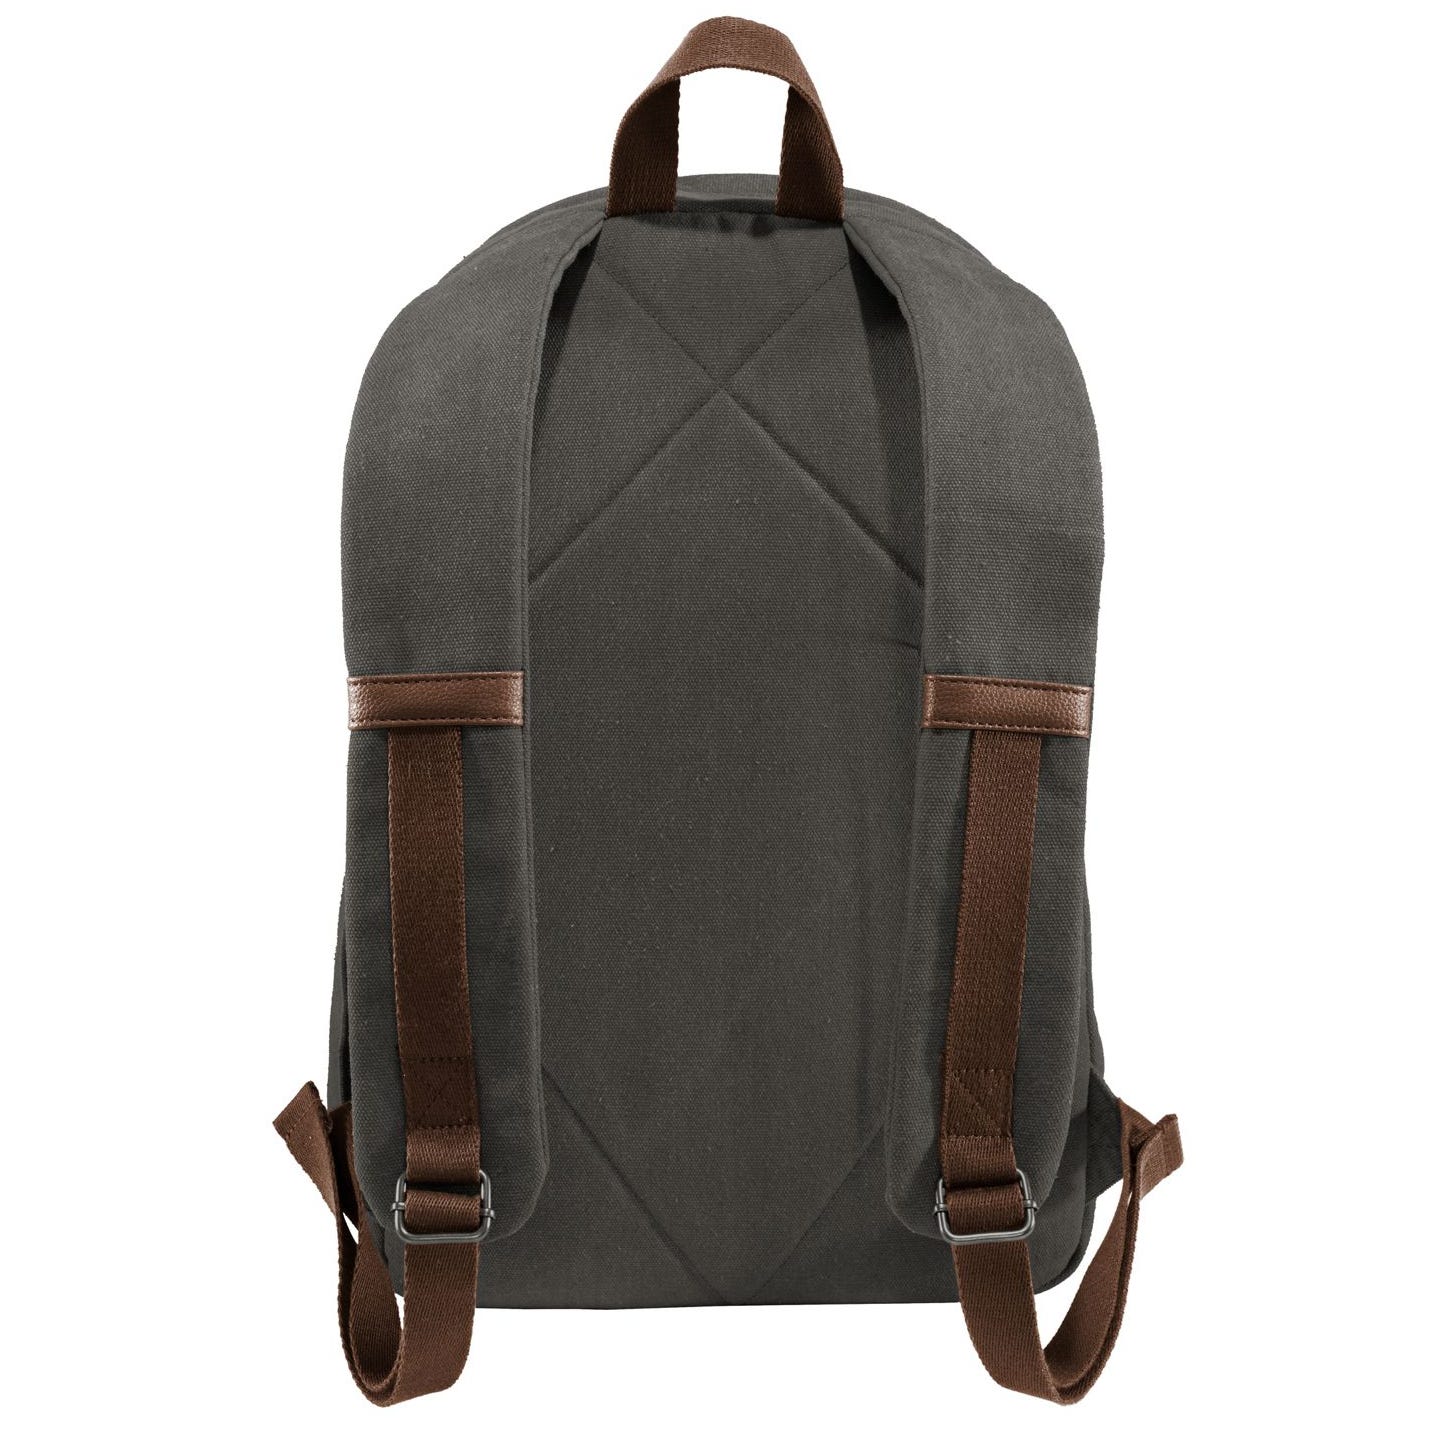 Funny 80th Birthday: It Took Me 80 Years To Look This Good Cotton Canvas Backpack